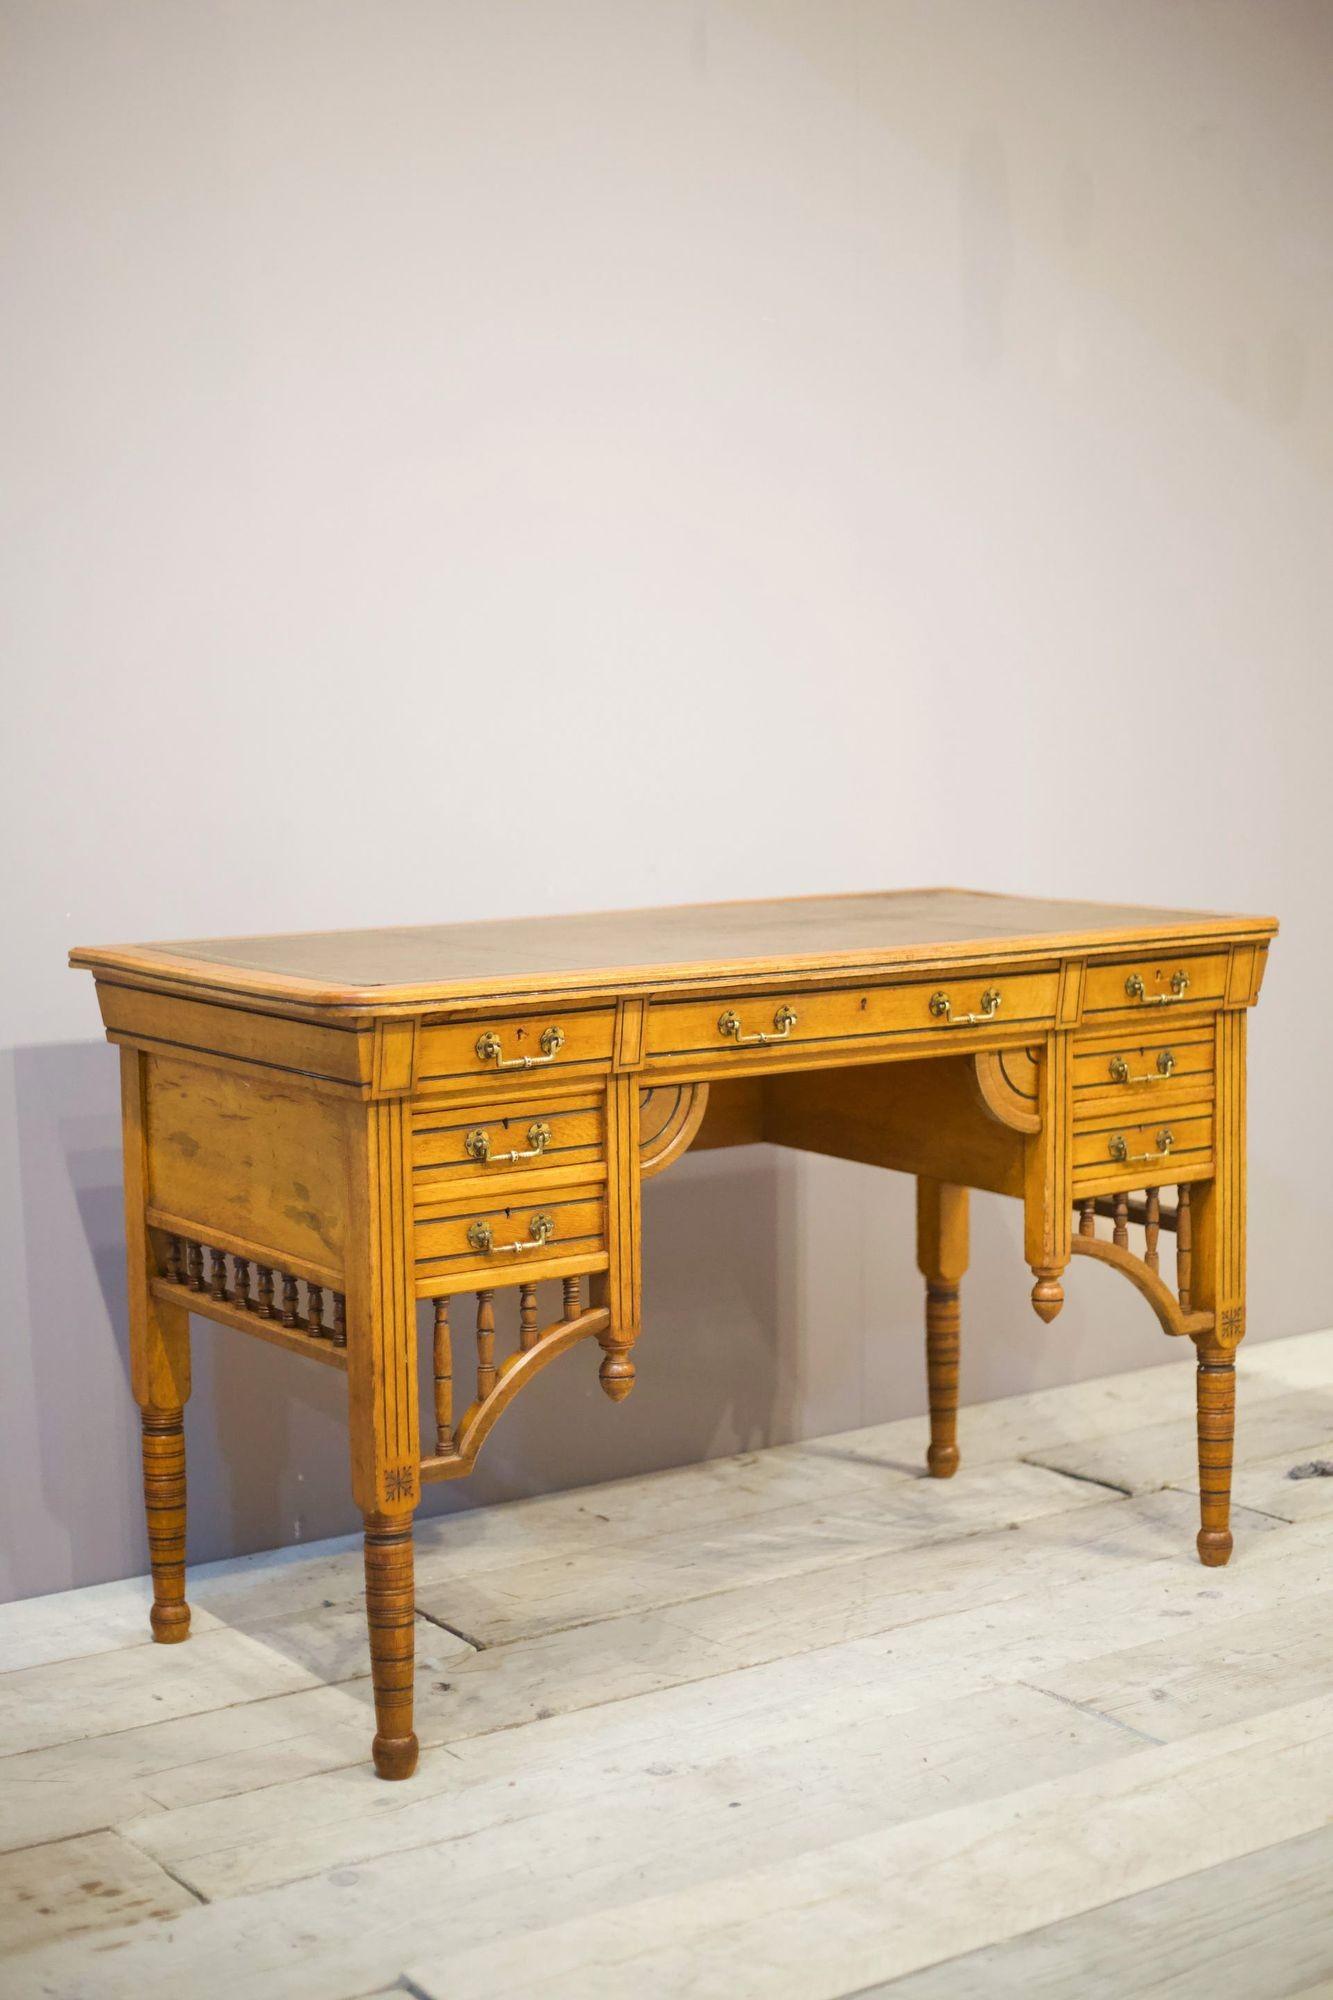 This is a very stylish piece of Aesthetic movement funriutre by renowned makers Maple and co. The whole design is wondeful with tall legs and almost Moorish influence. The drawers all run smooth and retain the original detailed handles. The whole